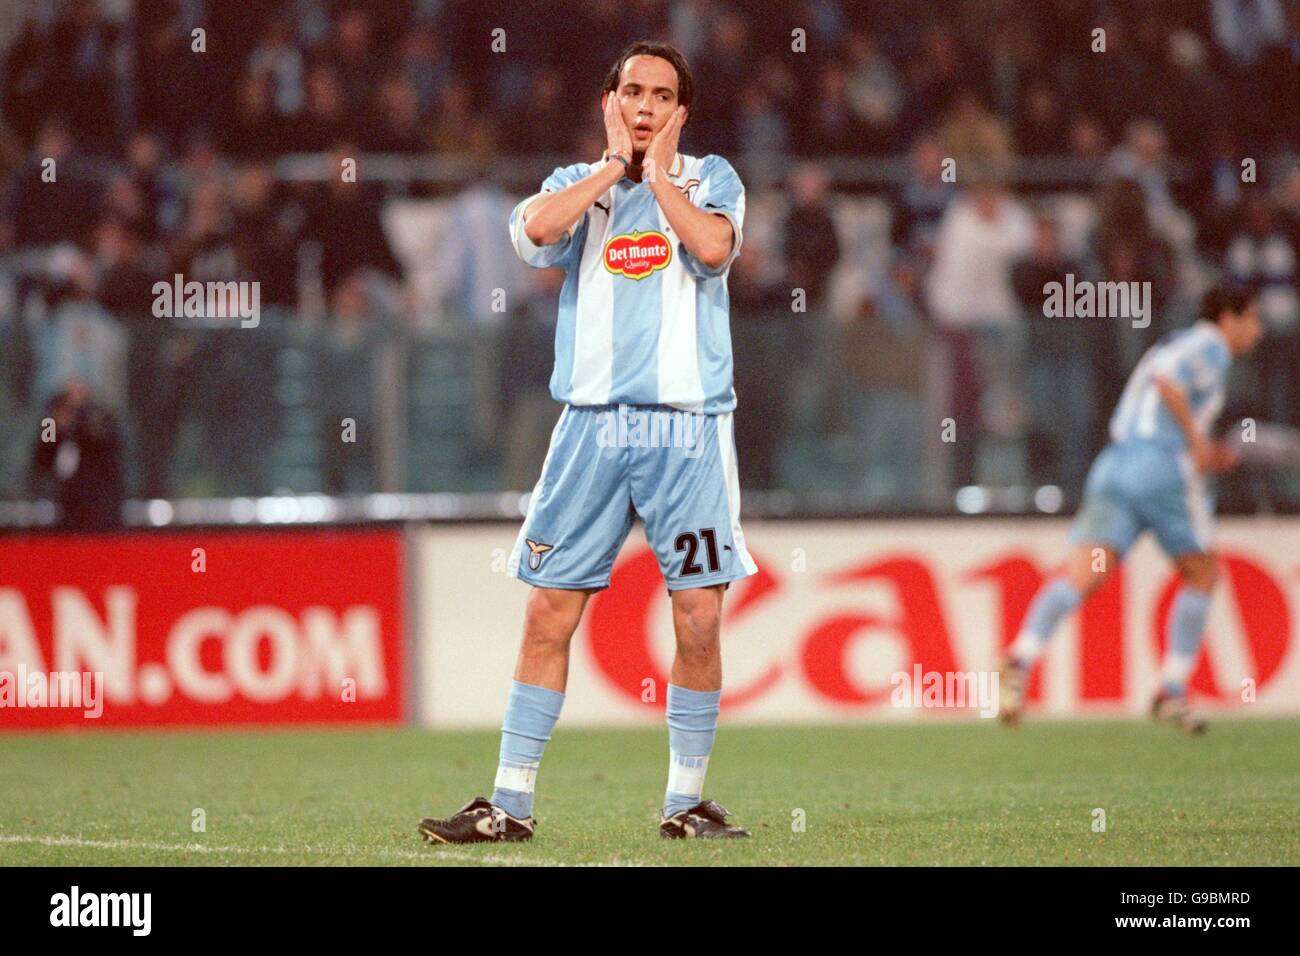 Soccer - UEFA Champions League - Quarter Final Second Leg - Lazio v Valencia. Lazio's Simone Inzaghi holds his head after missing a chance Stock Photo